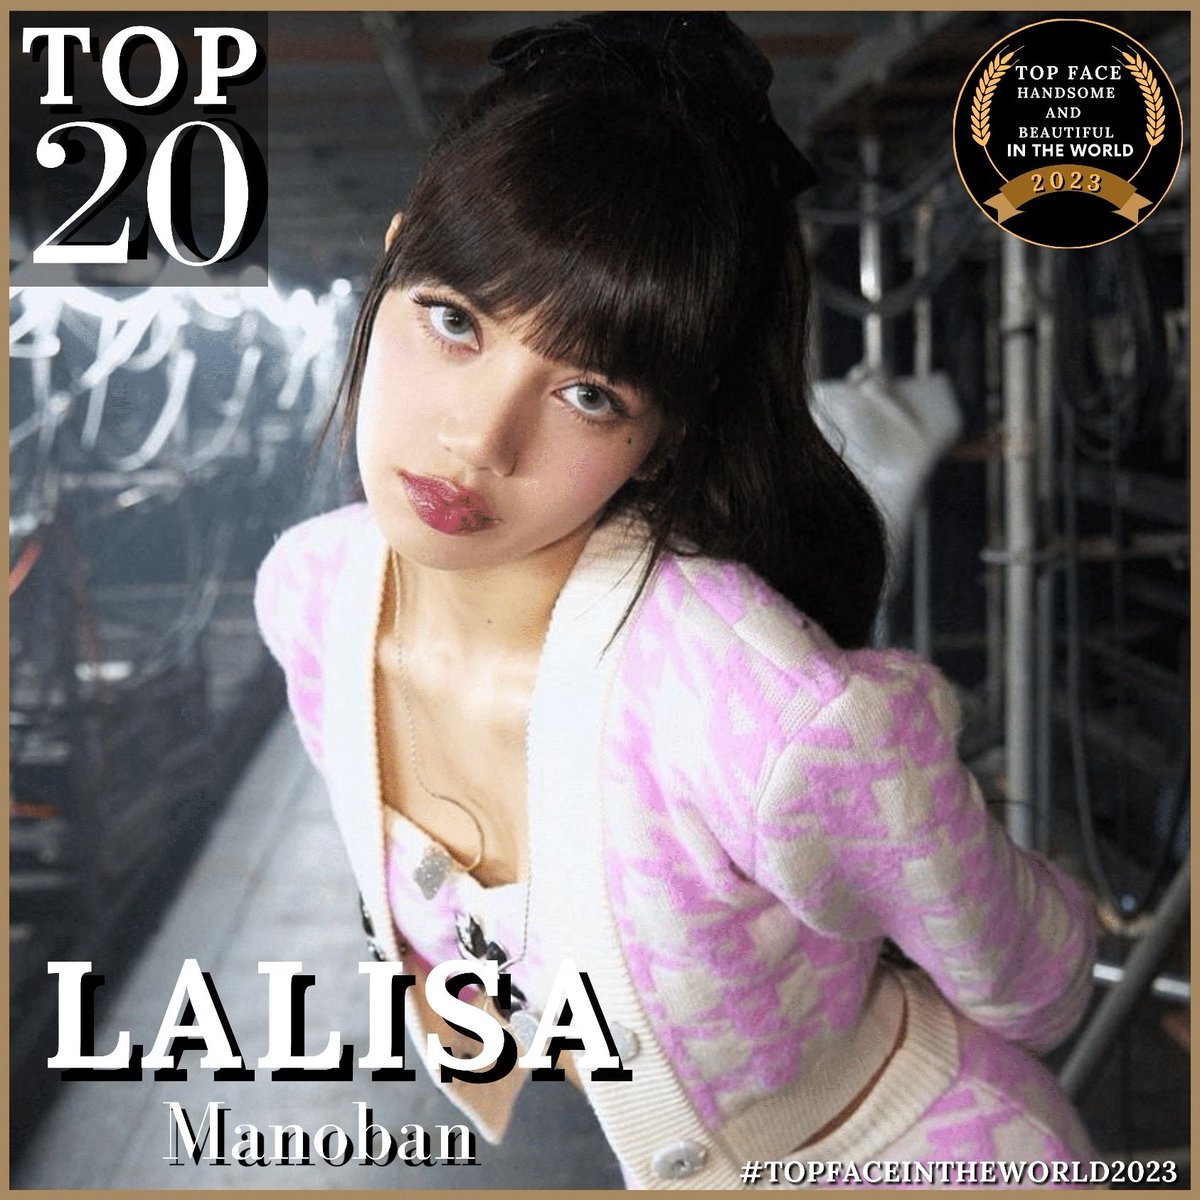 VOTE TOP 20 TOP FACE OF THE YEARS 2023

NOMINEE 9
@lalisahourIy (THAILAND)

VOTE BY COMMENT, LIKE AND SHARE WITH HASTAG #topfaceintheword2023
1 LIKE 5 VOTES
1 COMMENT 3 VOTES
1 SHARE 10 VOTES

#LALISA #LISA #BLACKPINKinRiyadh #blink #LALISAMANOBAN #BLACKPINK_WORLDTOUR #Blinkit